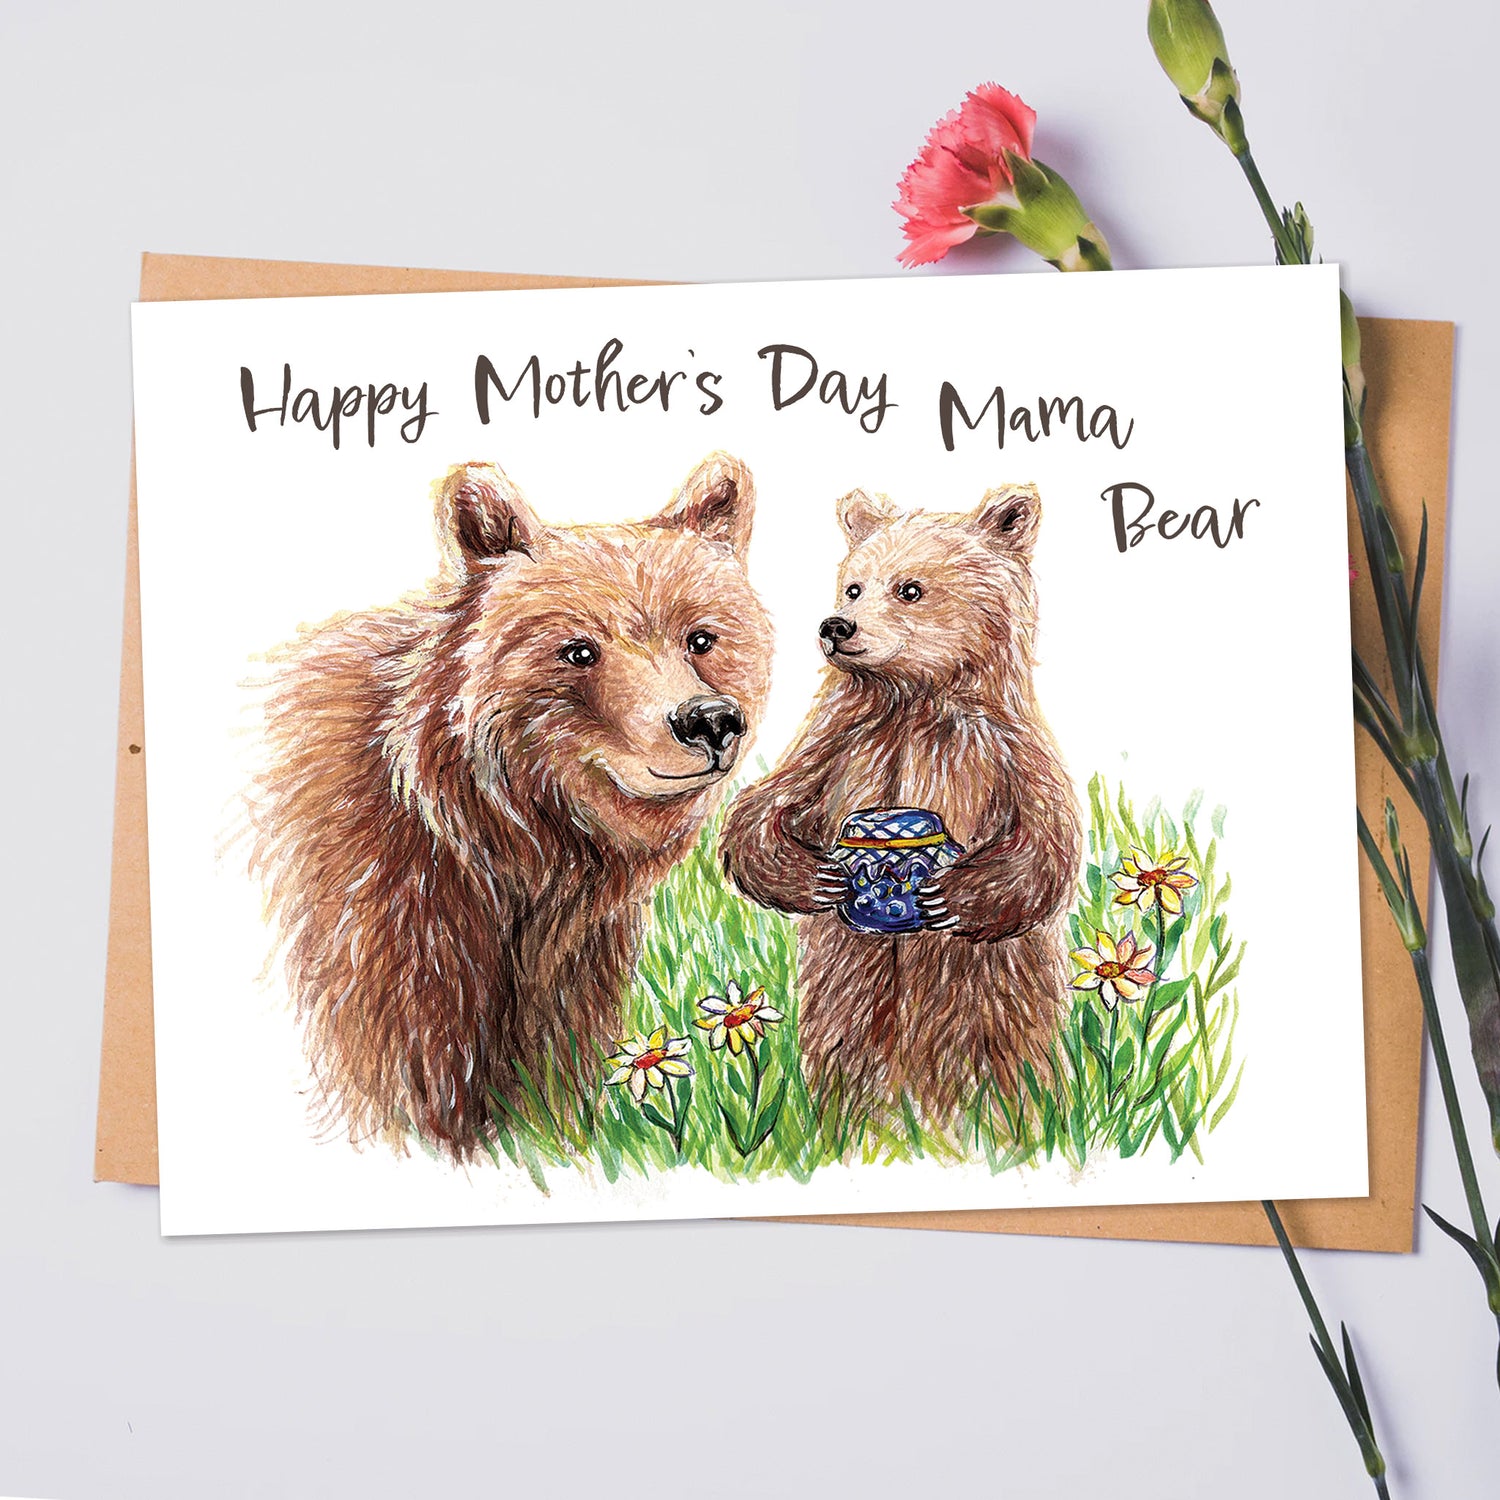 a hand drawn greeting card for mother's day. the text reads "Happy mother's day". the image is three little brown bear cubs, and a mama bear, crossing the road with trees in the background. the art is sepia toned, drawn by pyrography.